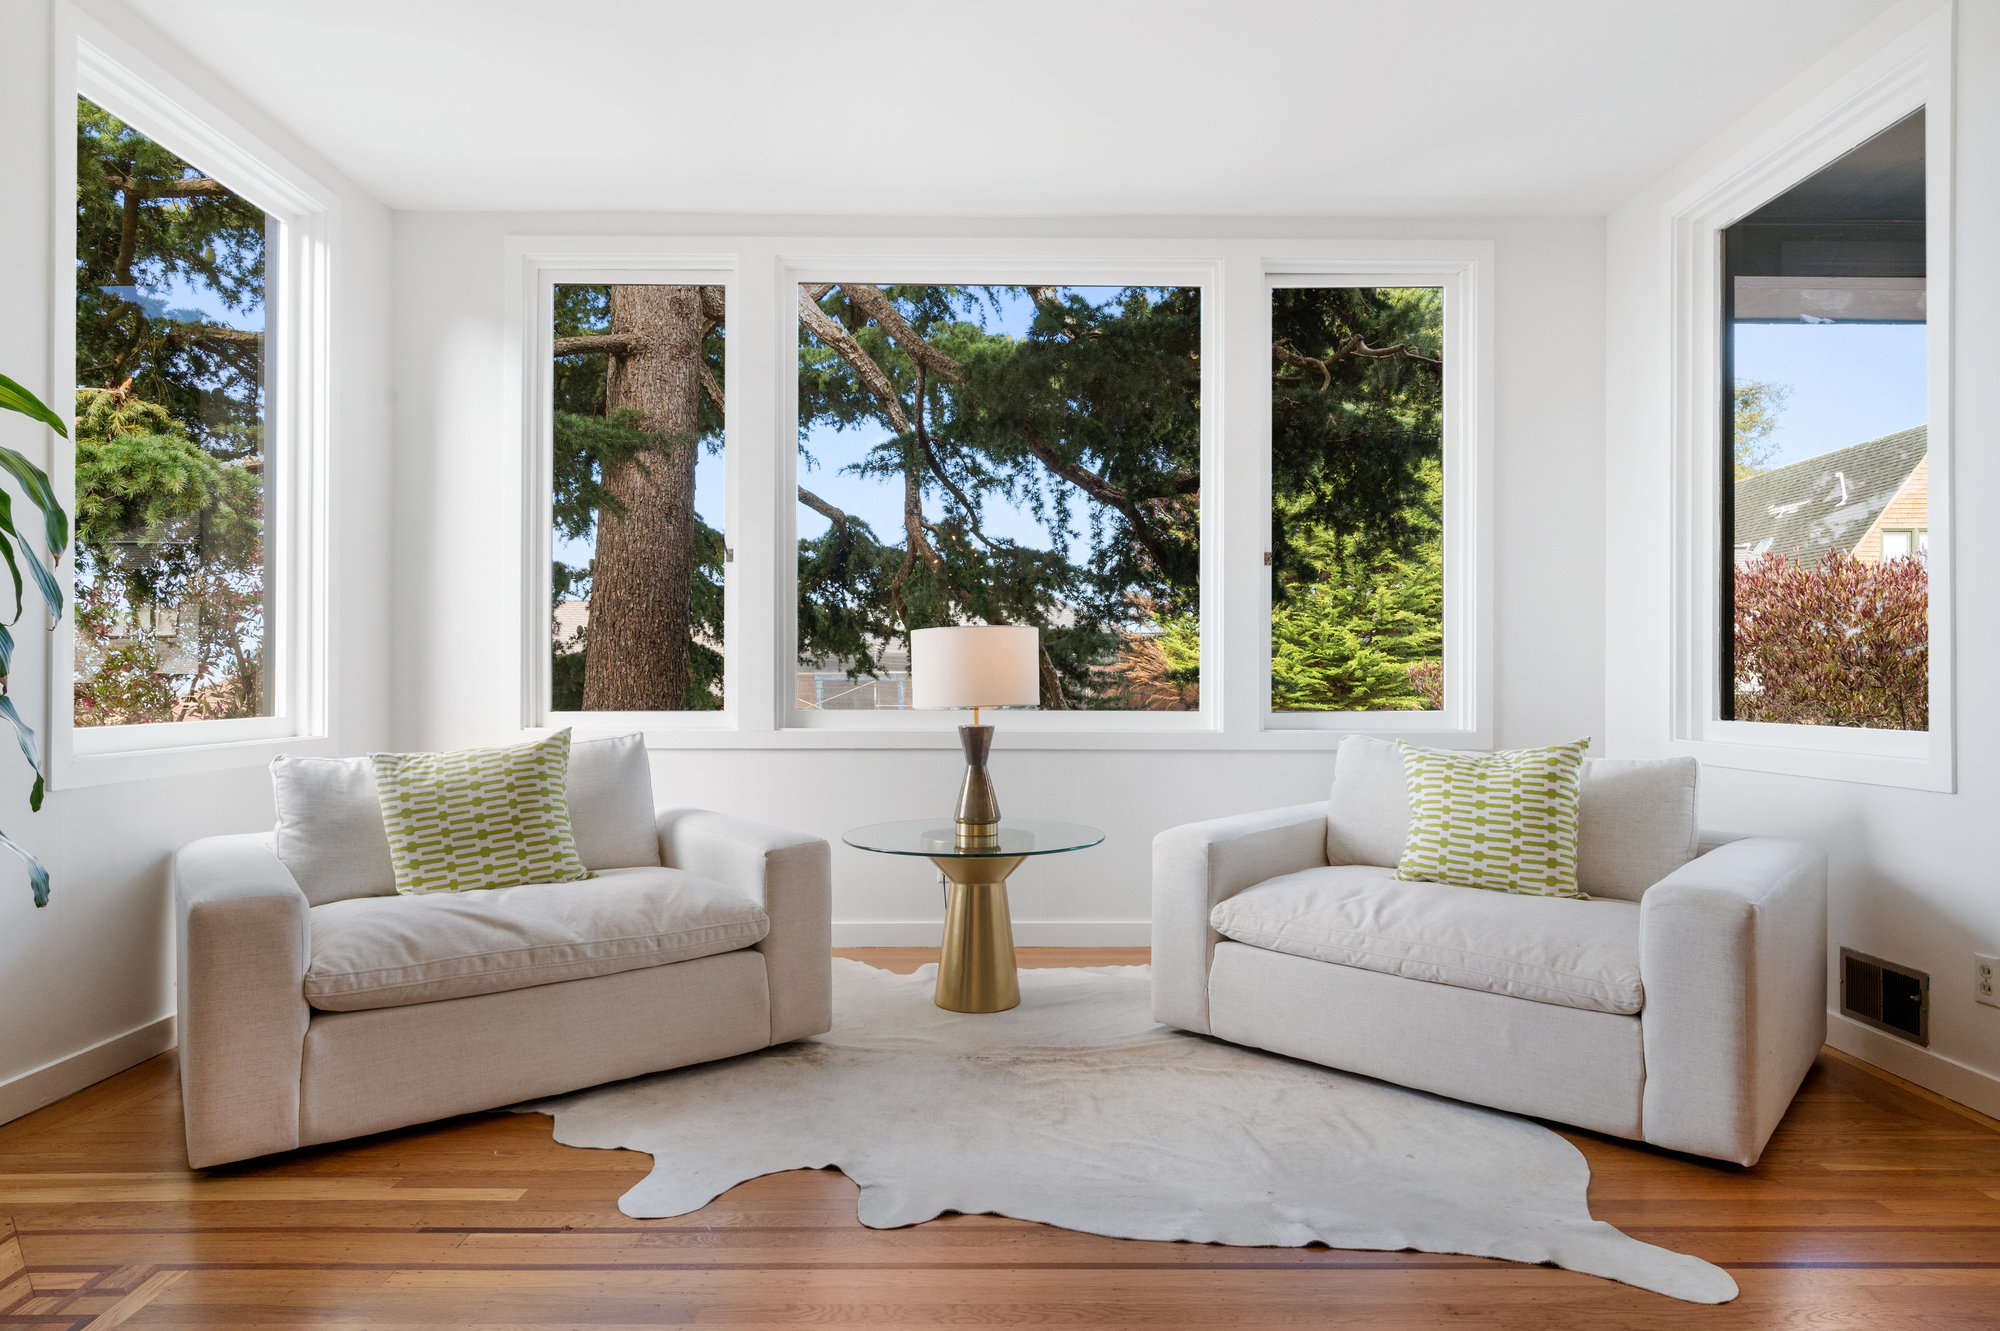 Property Photo: Close-up of a sitting area with wrap-around windows on three sides